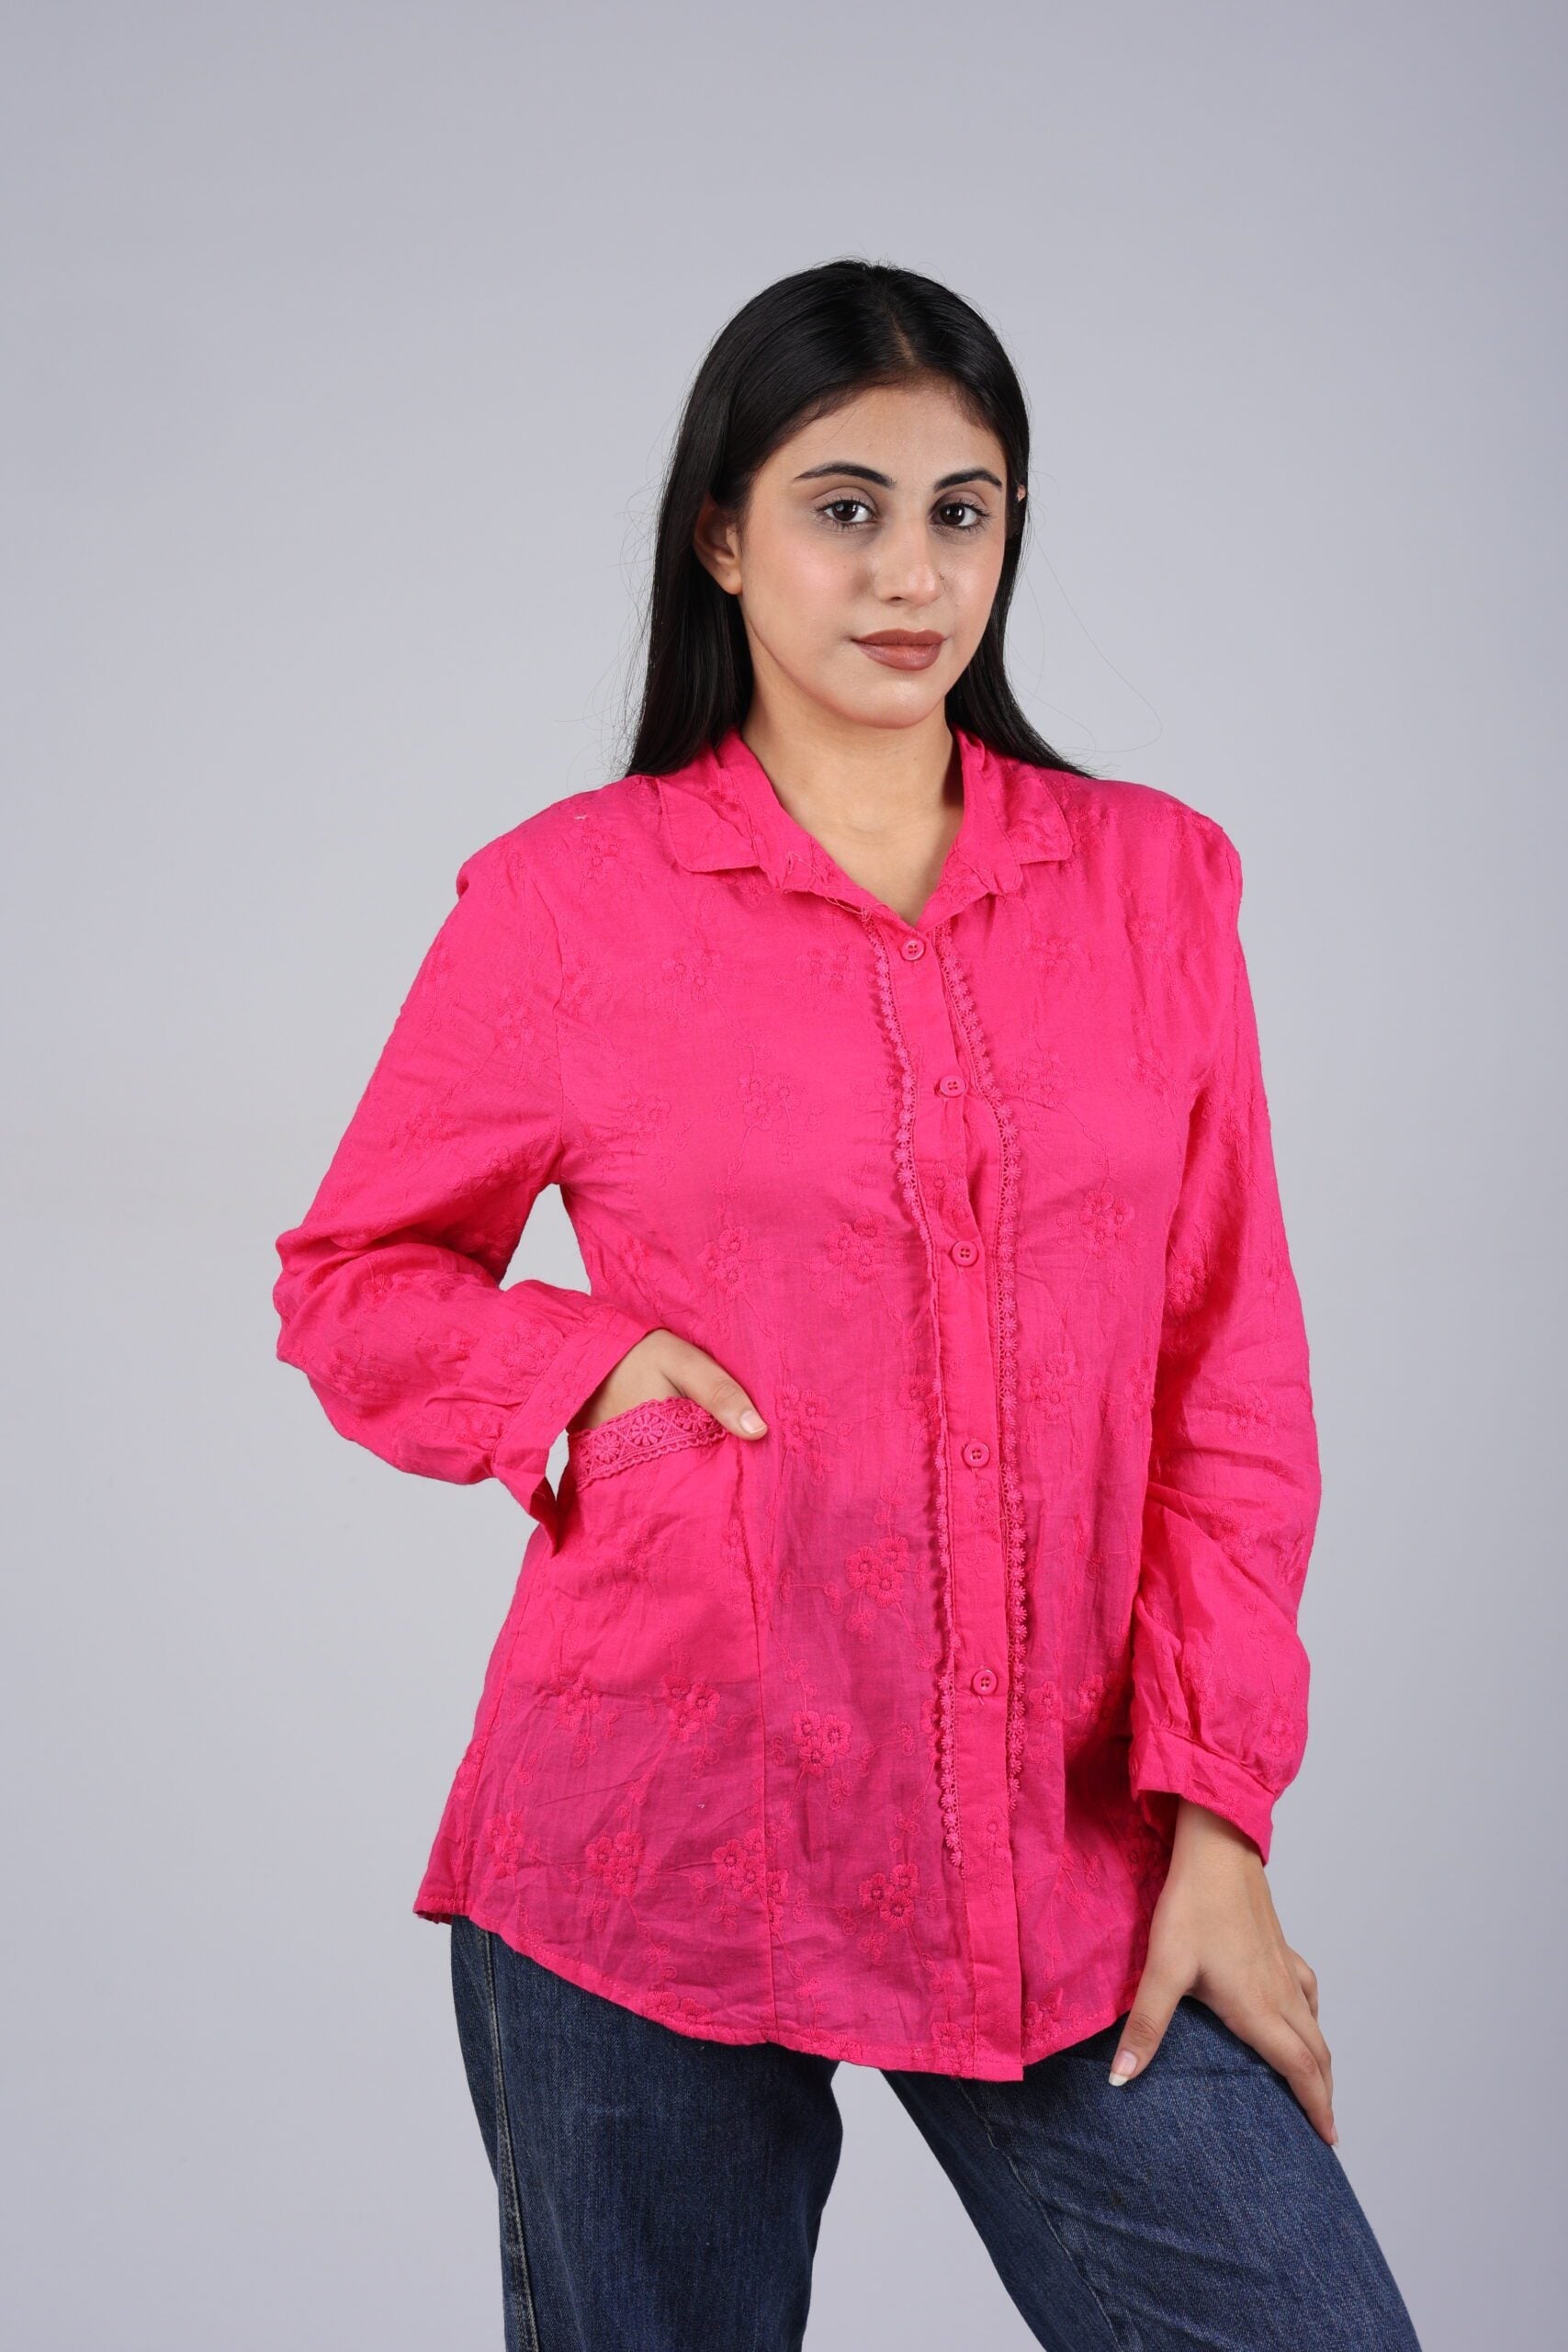 Pocketed Chicken Shirt  Top (Hot Pink) A Perfect Blend of Comfort and Style!